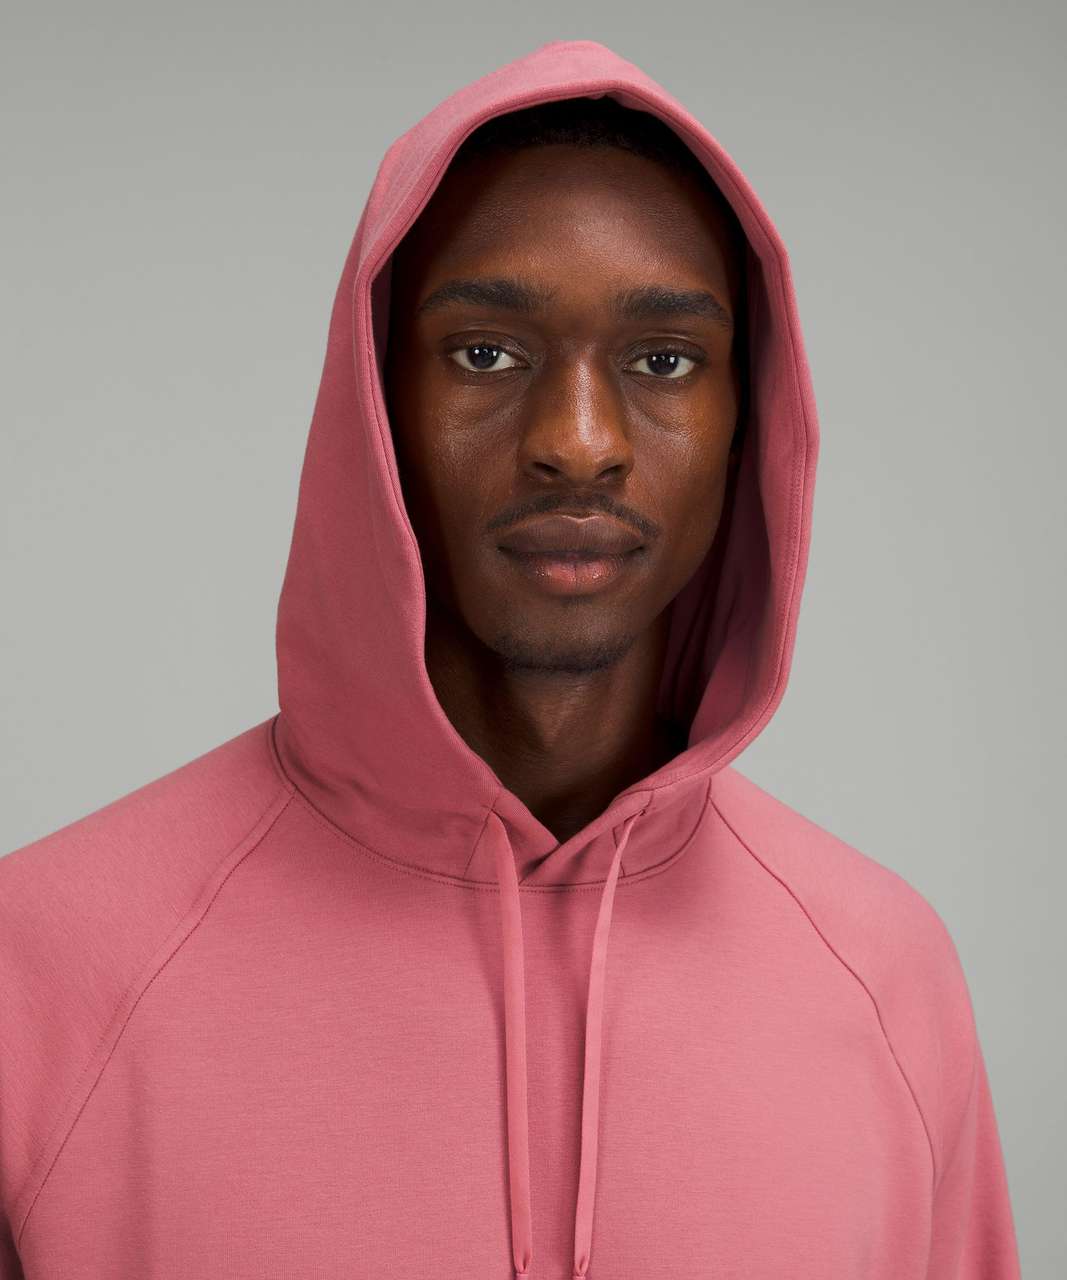 Lululemon City Sweat Pullover Hoodie French Terry - Brier Rose